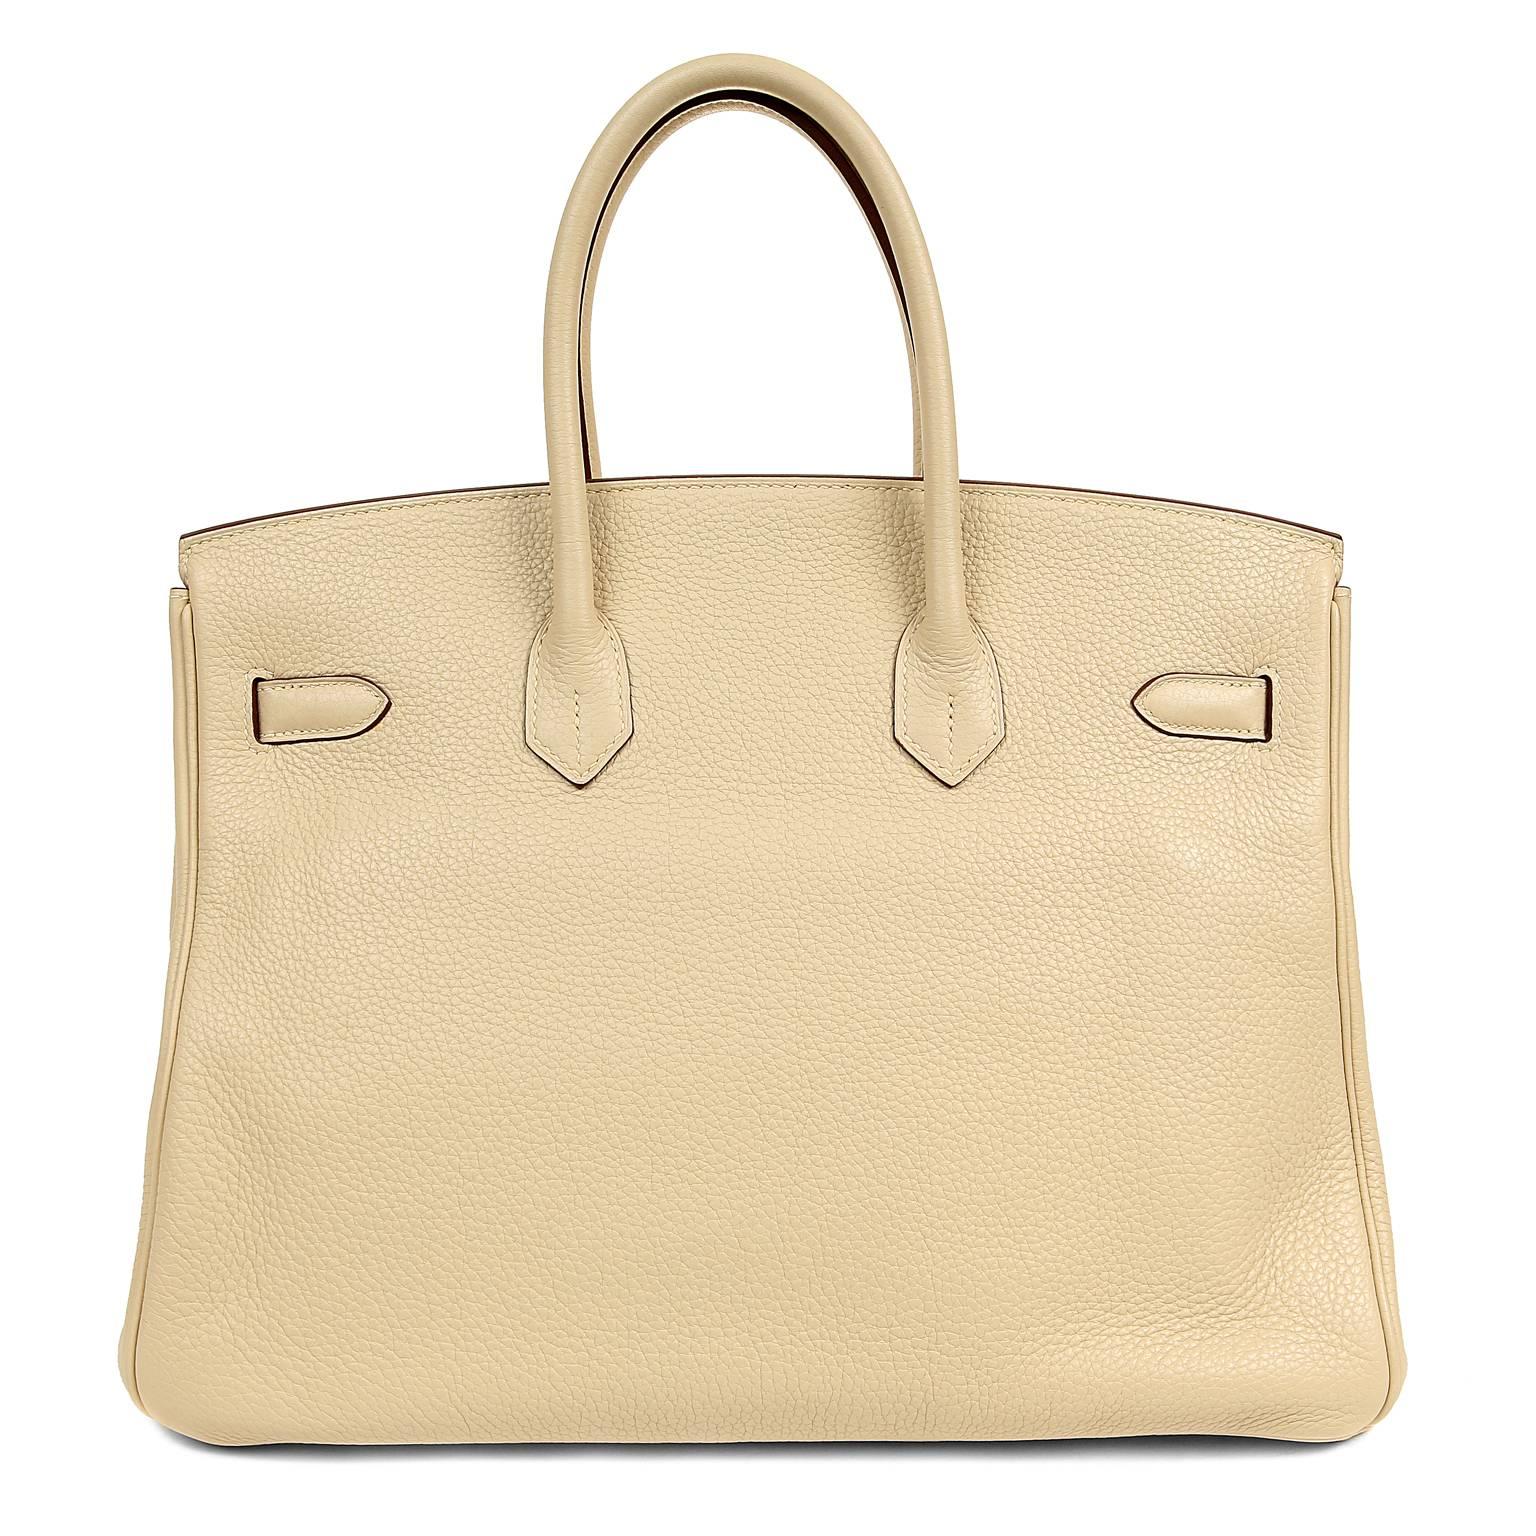 Hermès Parchemin Togo 35 cm Birkin Bag- PRISTINE; appears never carried. 
Waitlists exceeding a year are commonplace for the intensely coveted Birkin.  Each piece is hand sewn by skilled artisans and represents the epitome of fashion luxury. 